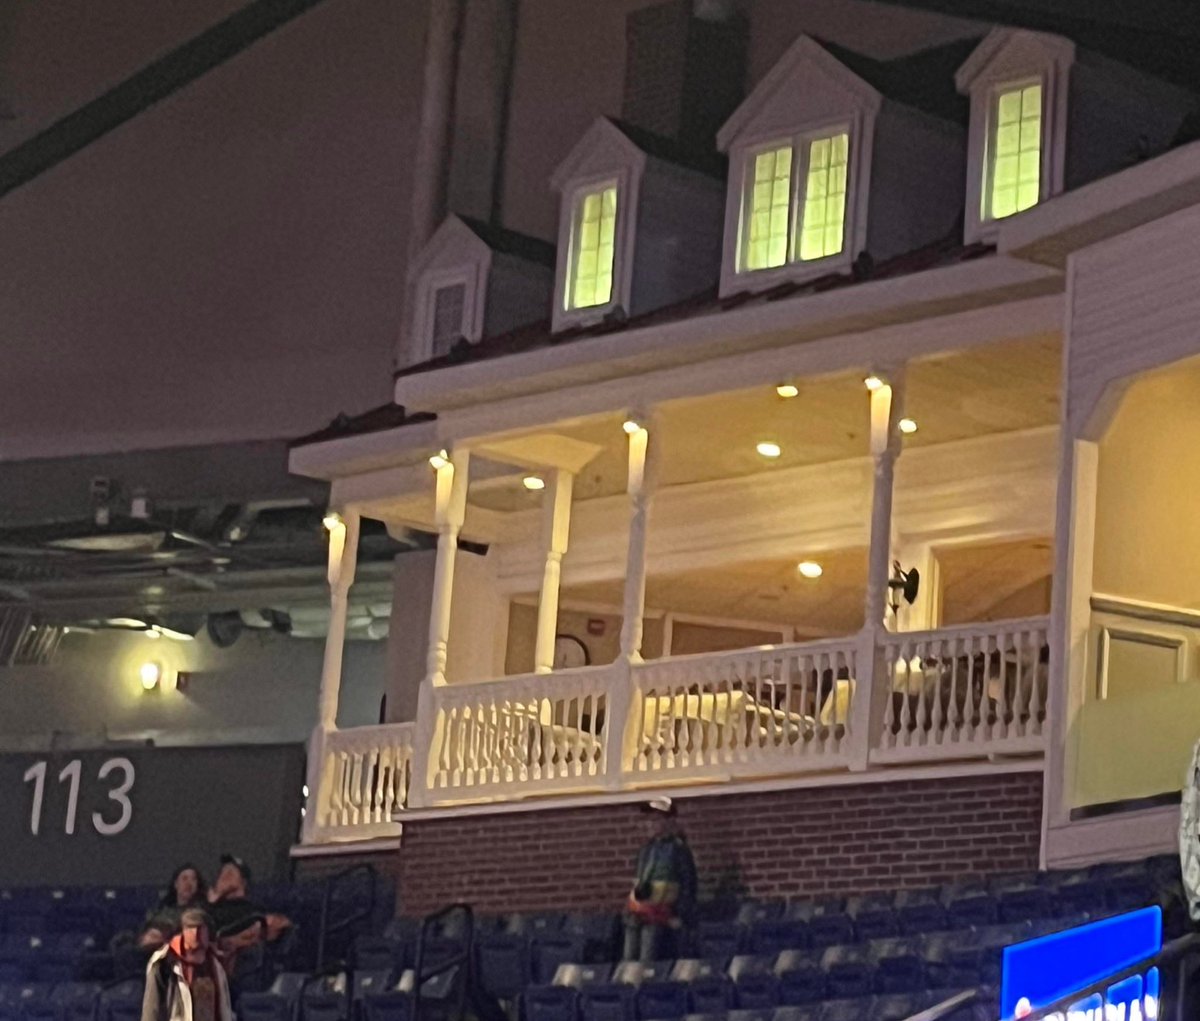 Santander Arena in Reading, PA has a “front porch” club box